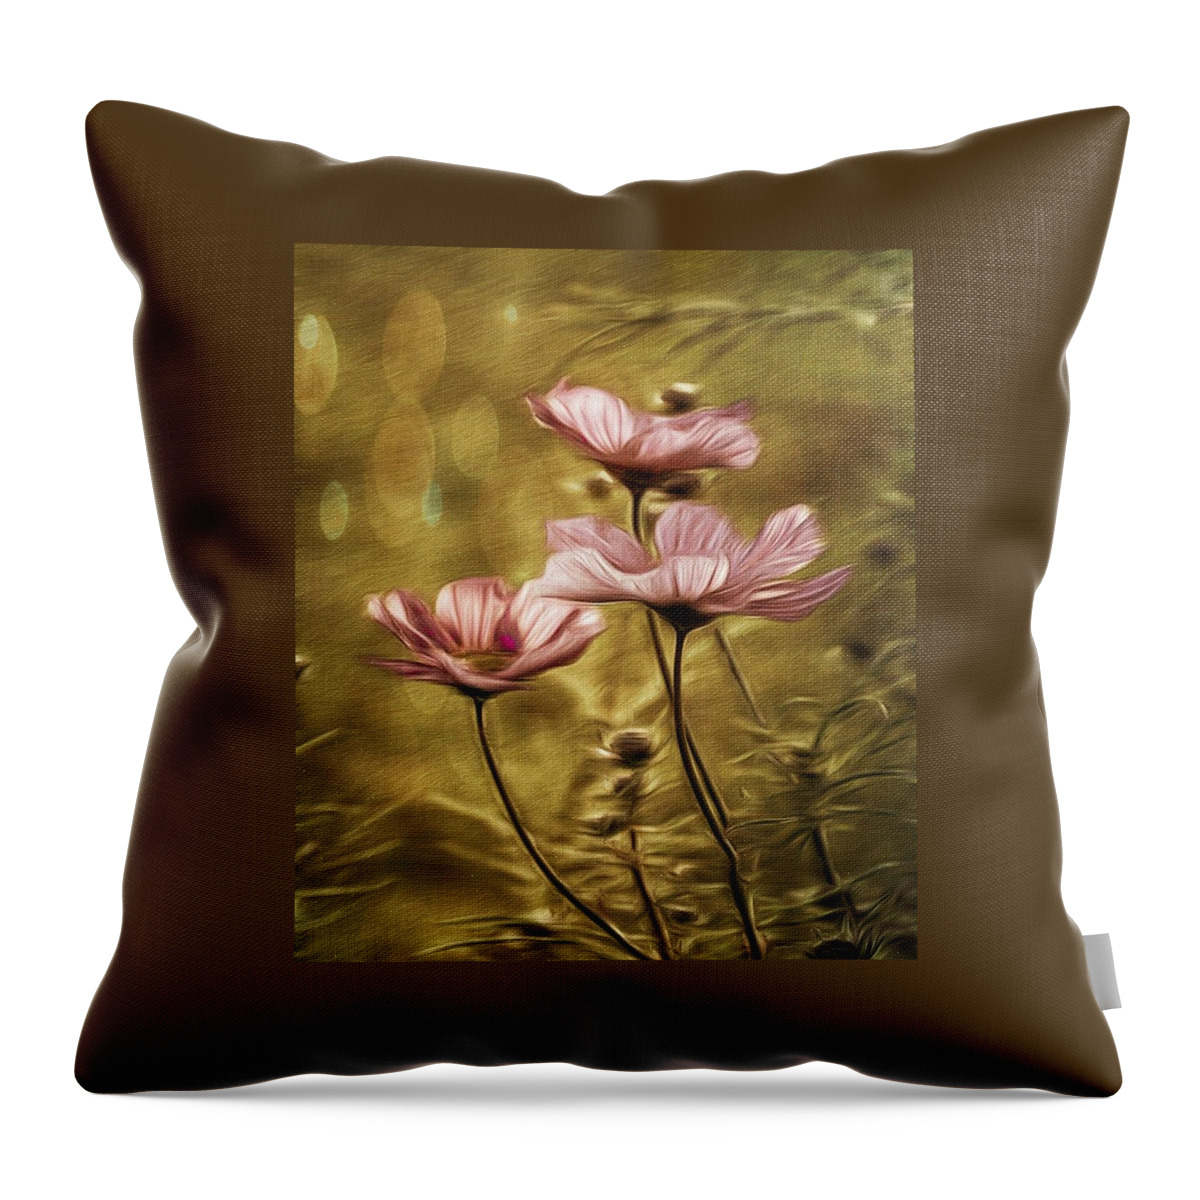 Flower Throw Pillow featuring the photograph Little Flowers by Phyllis Meinke